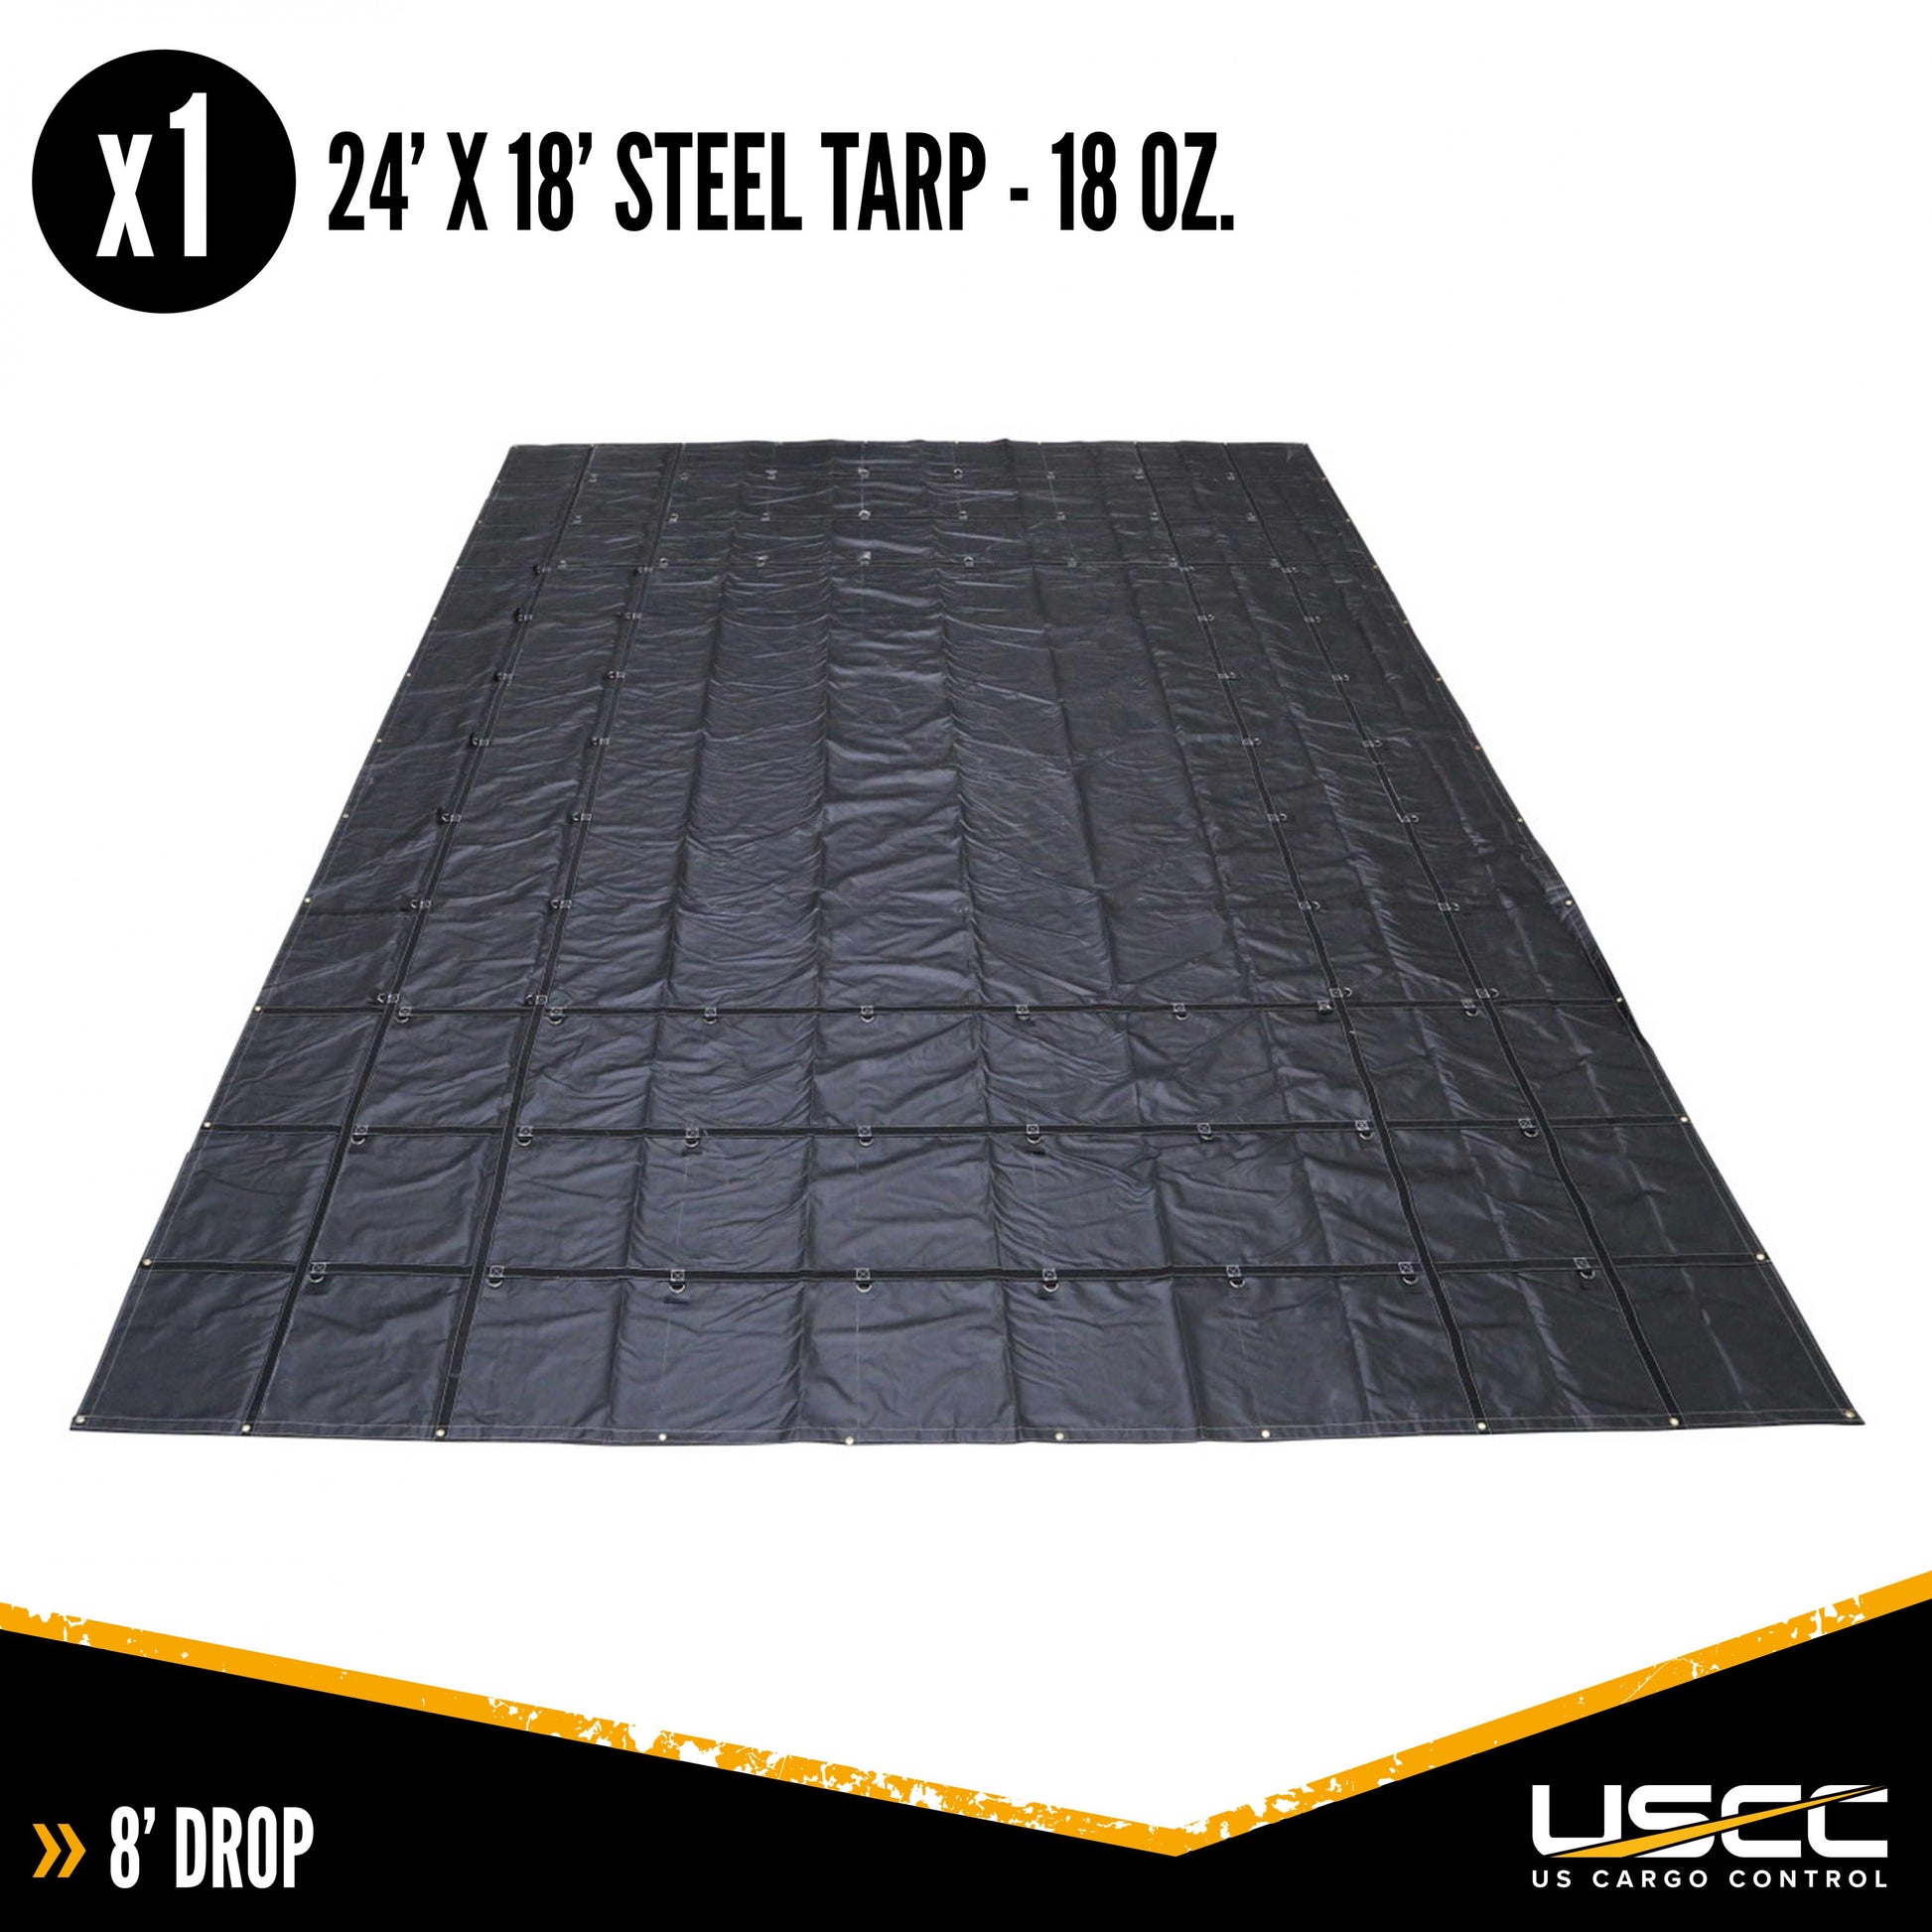 18 oz 3 Piece Lumber Tarp 24 foot x 18 foot (8 foot Drop) for all 3 pieces Black image 3 of 10